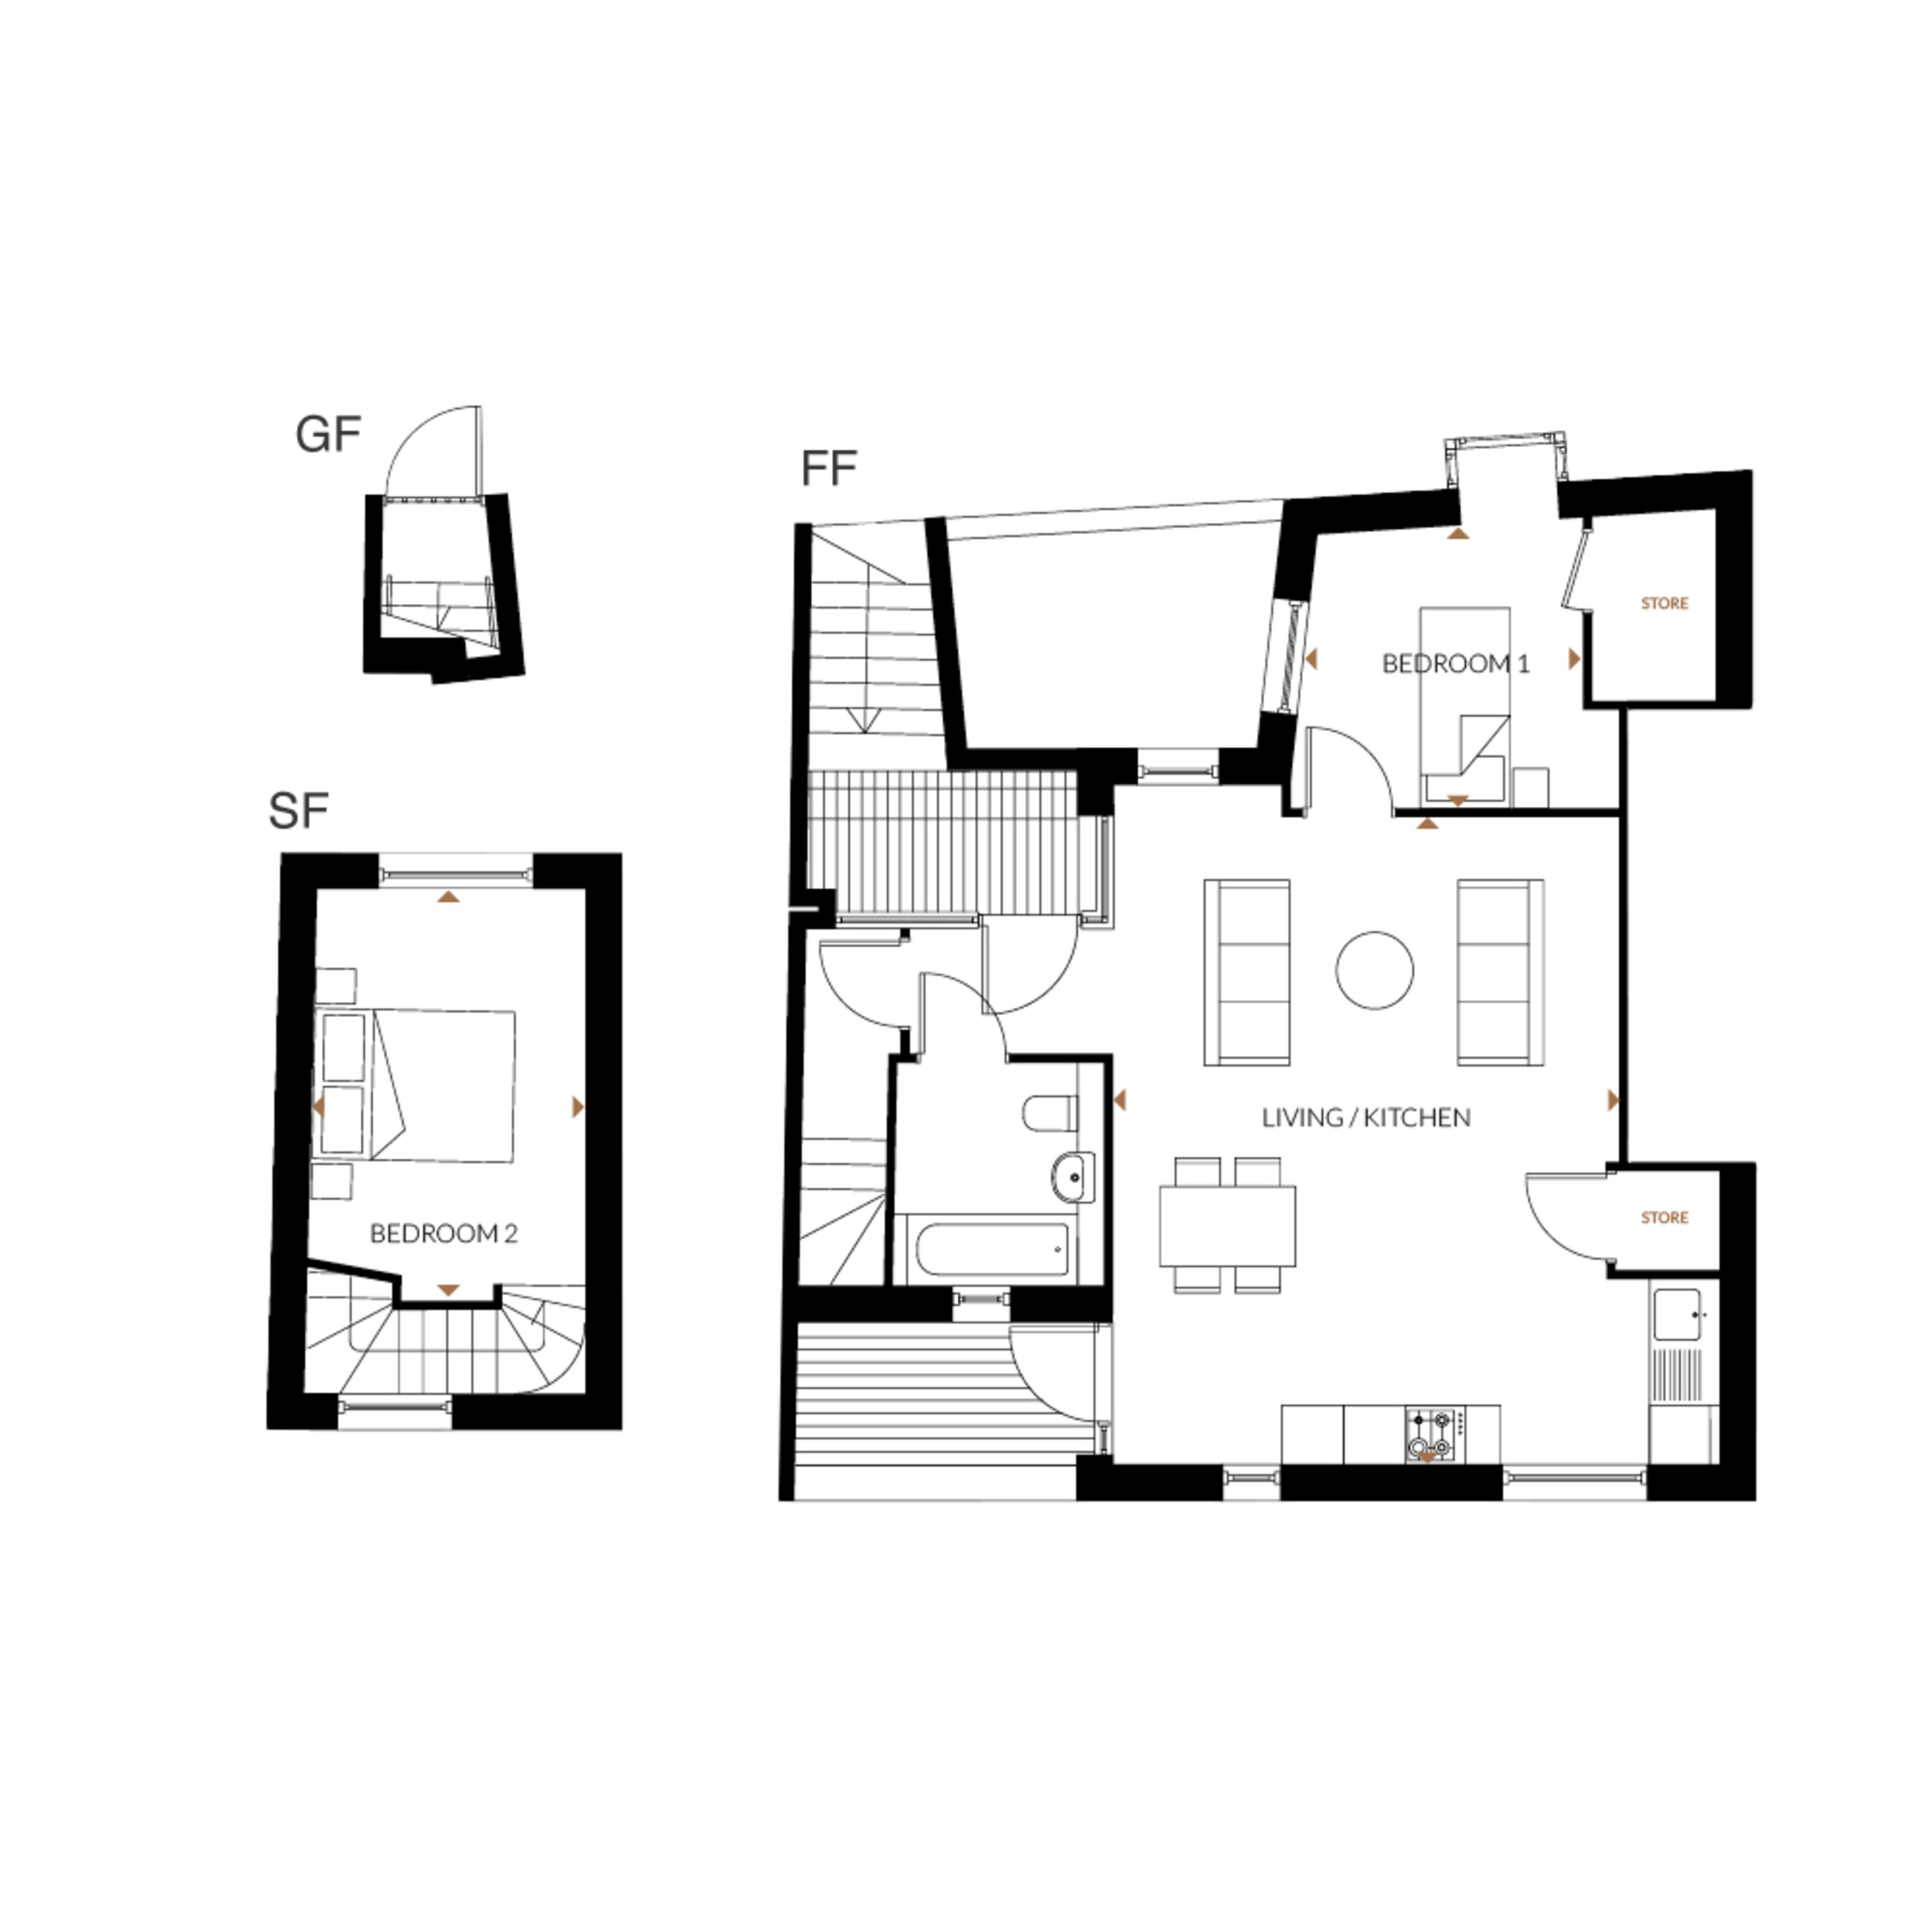 persona-homes-edgewood-mews-flats-for-sale-north-london-floorplan-2-bed-type-f